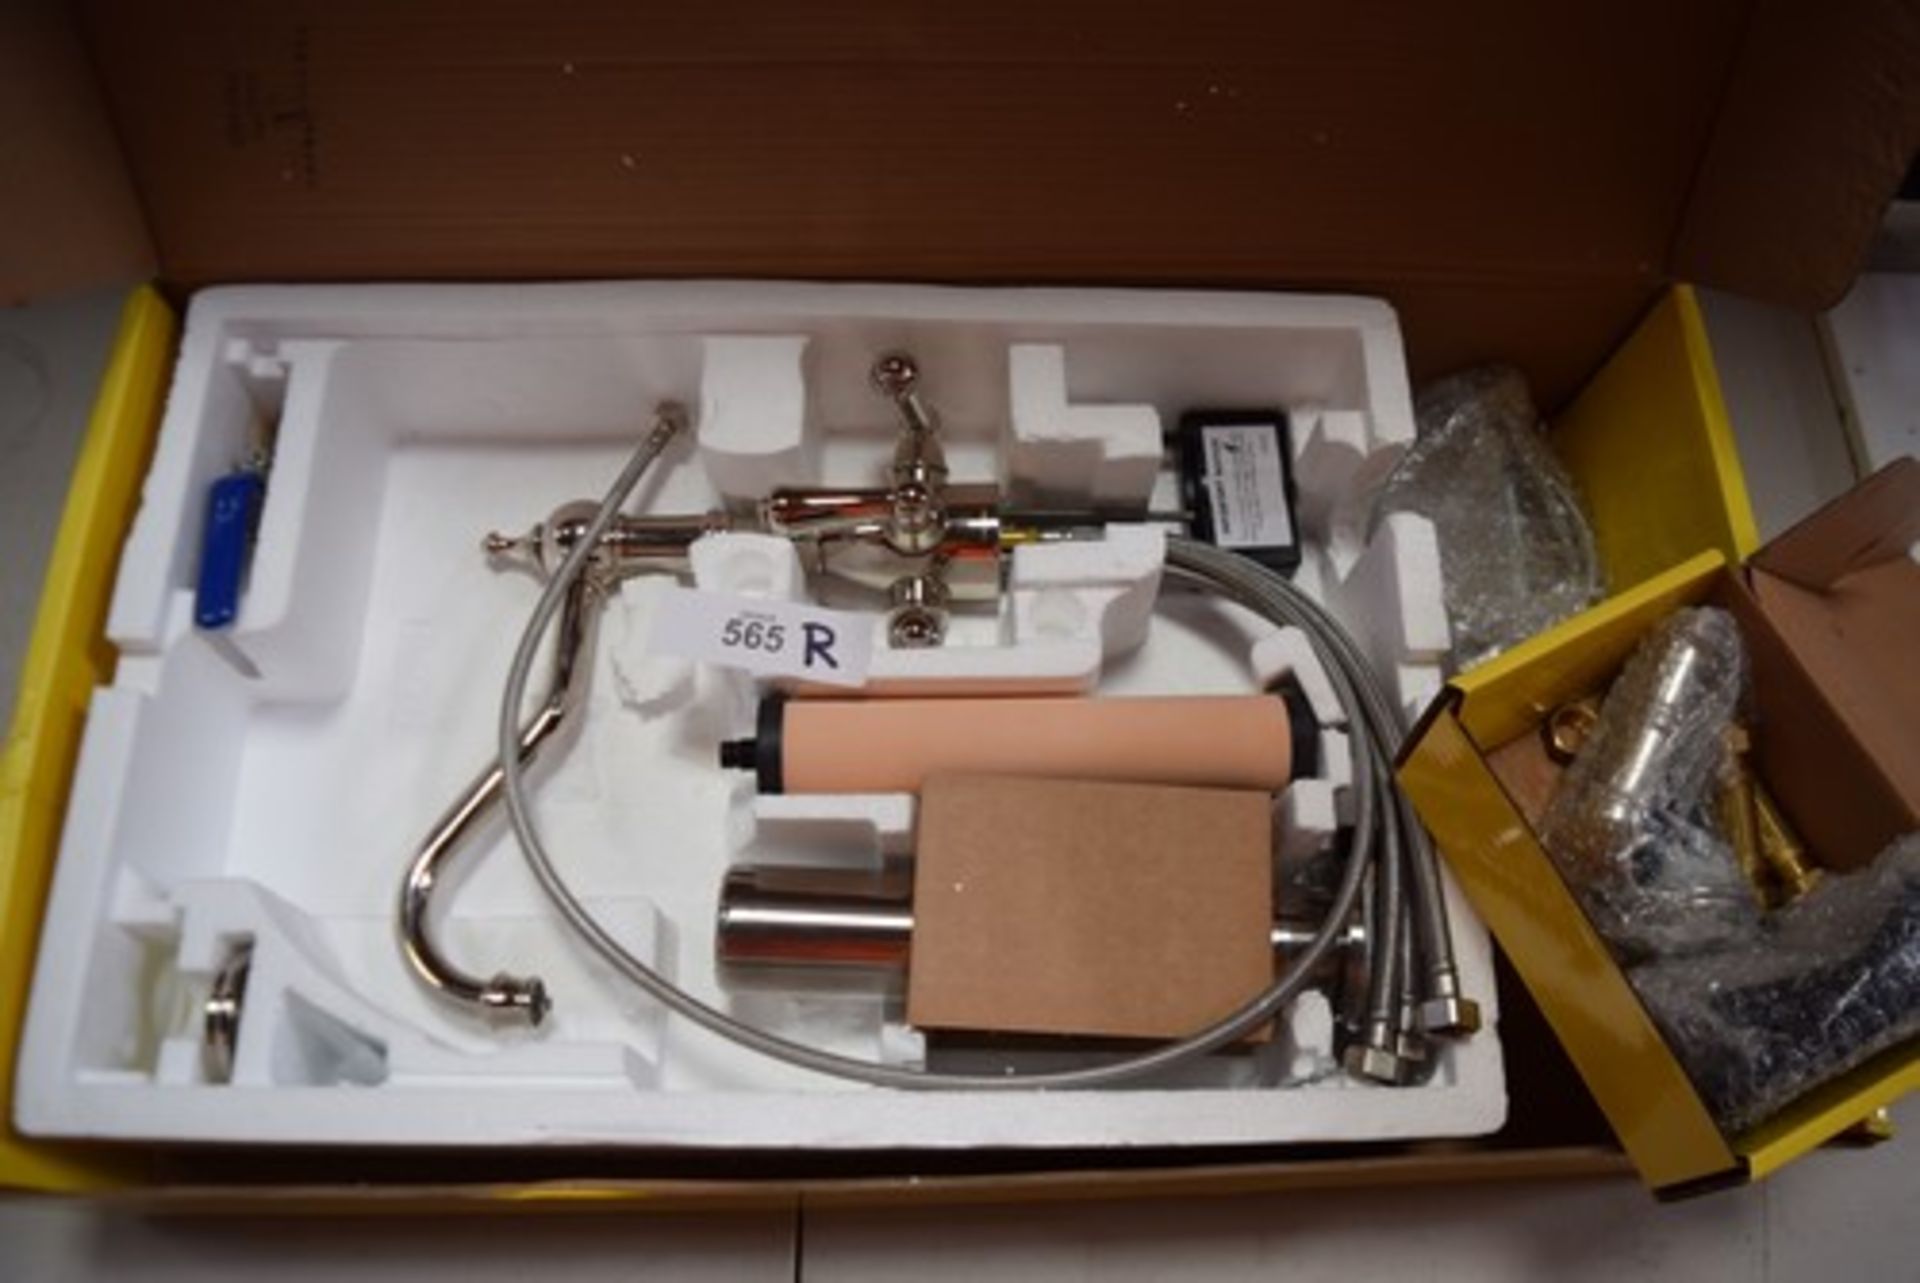 1 x Perrin and Rowe Picardie triple lever nickel sink filter tap and rinse, item No: 1575NI - new in